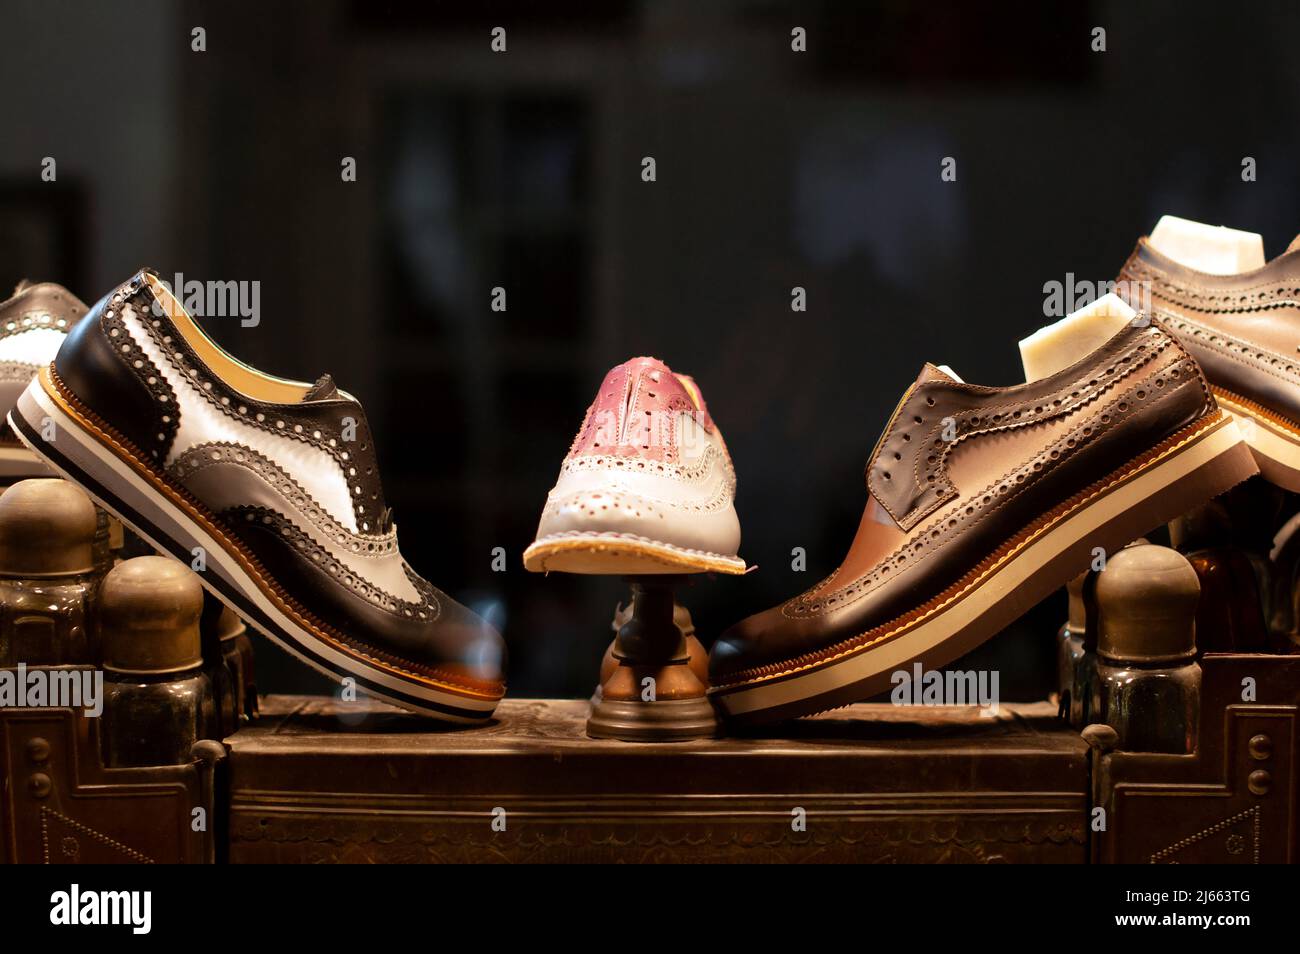 Brogue shoes with rubber soles are standing in a window display of a shoemaker workshop at night. They are standing on a vintage shoe care box. Stock Photo